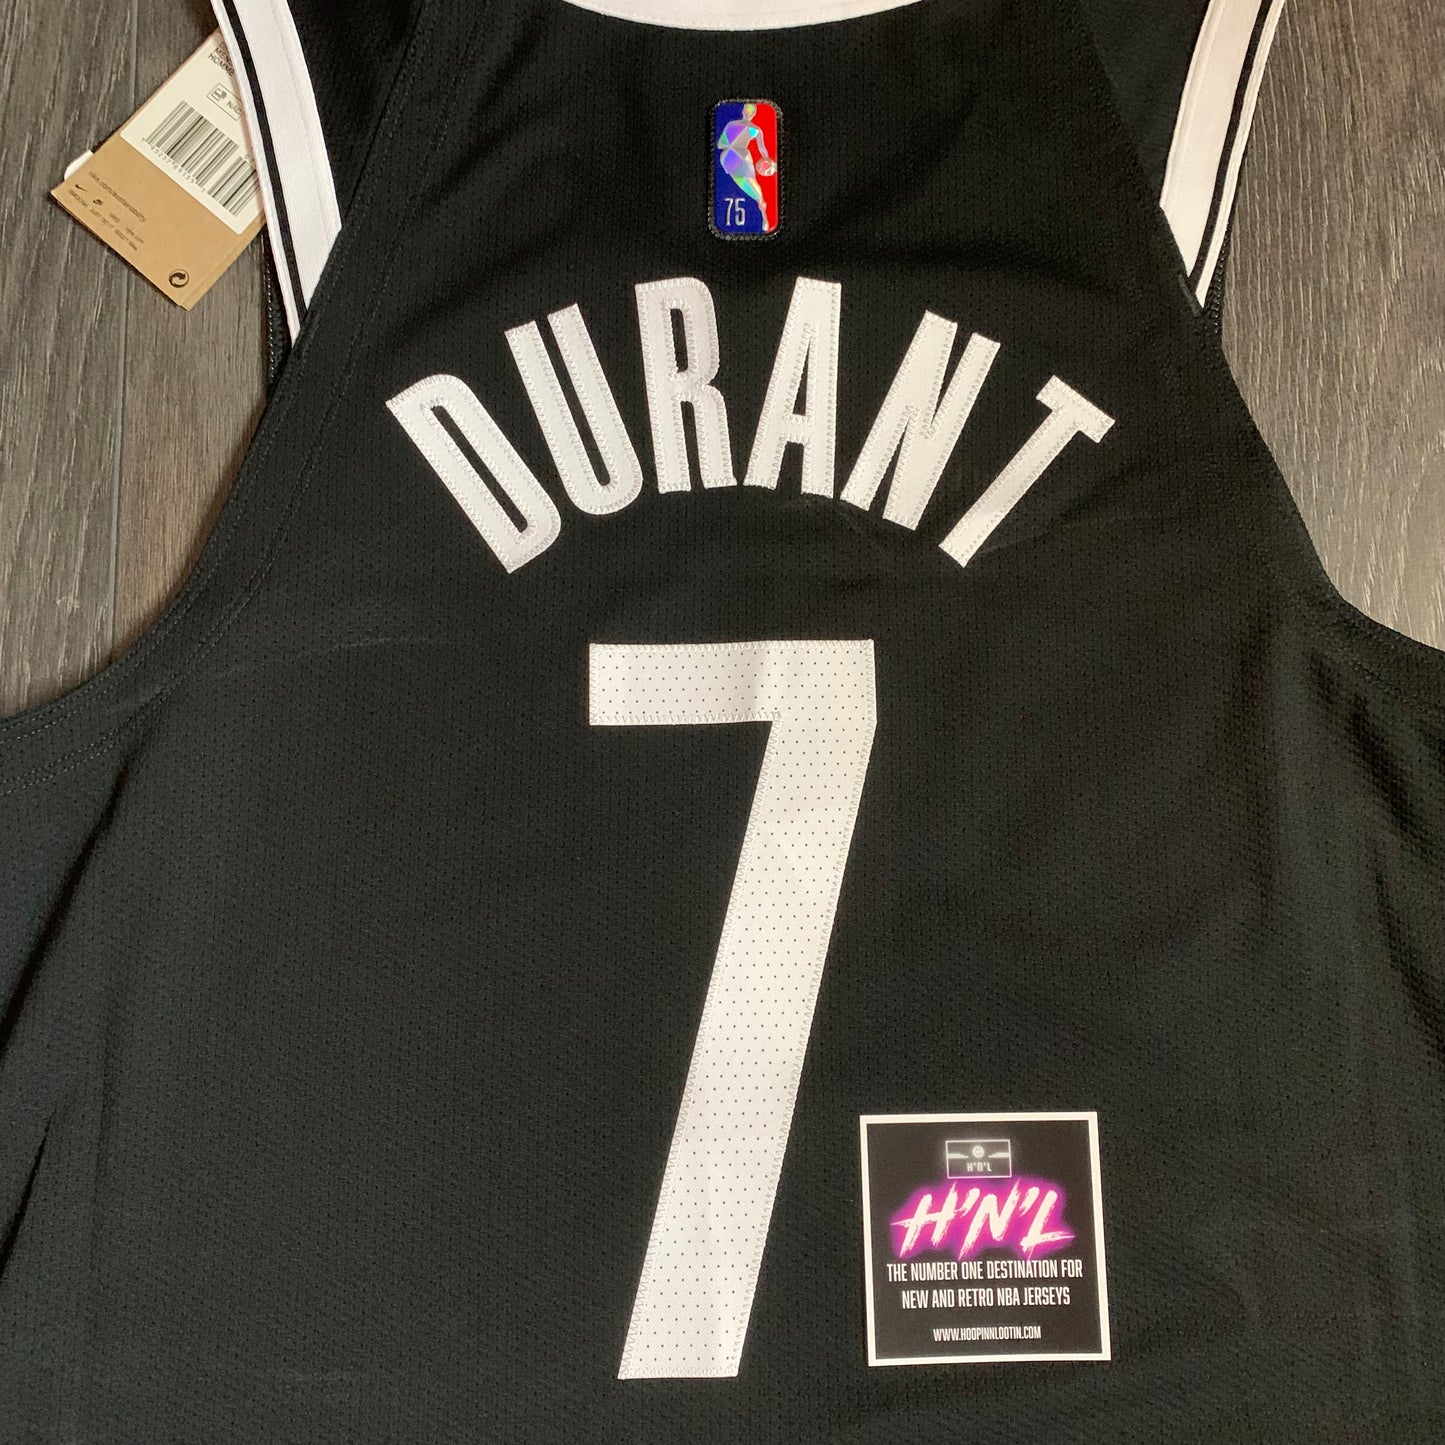 Kevin Durant Brooklyn Nets 75th Anniversary Authentic Icon Edition Nike Jersey